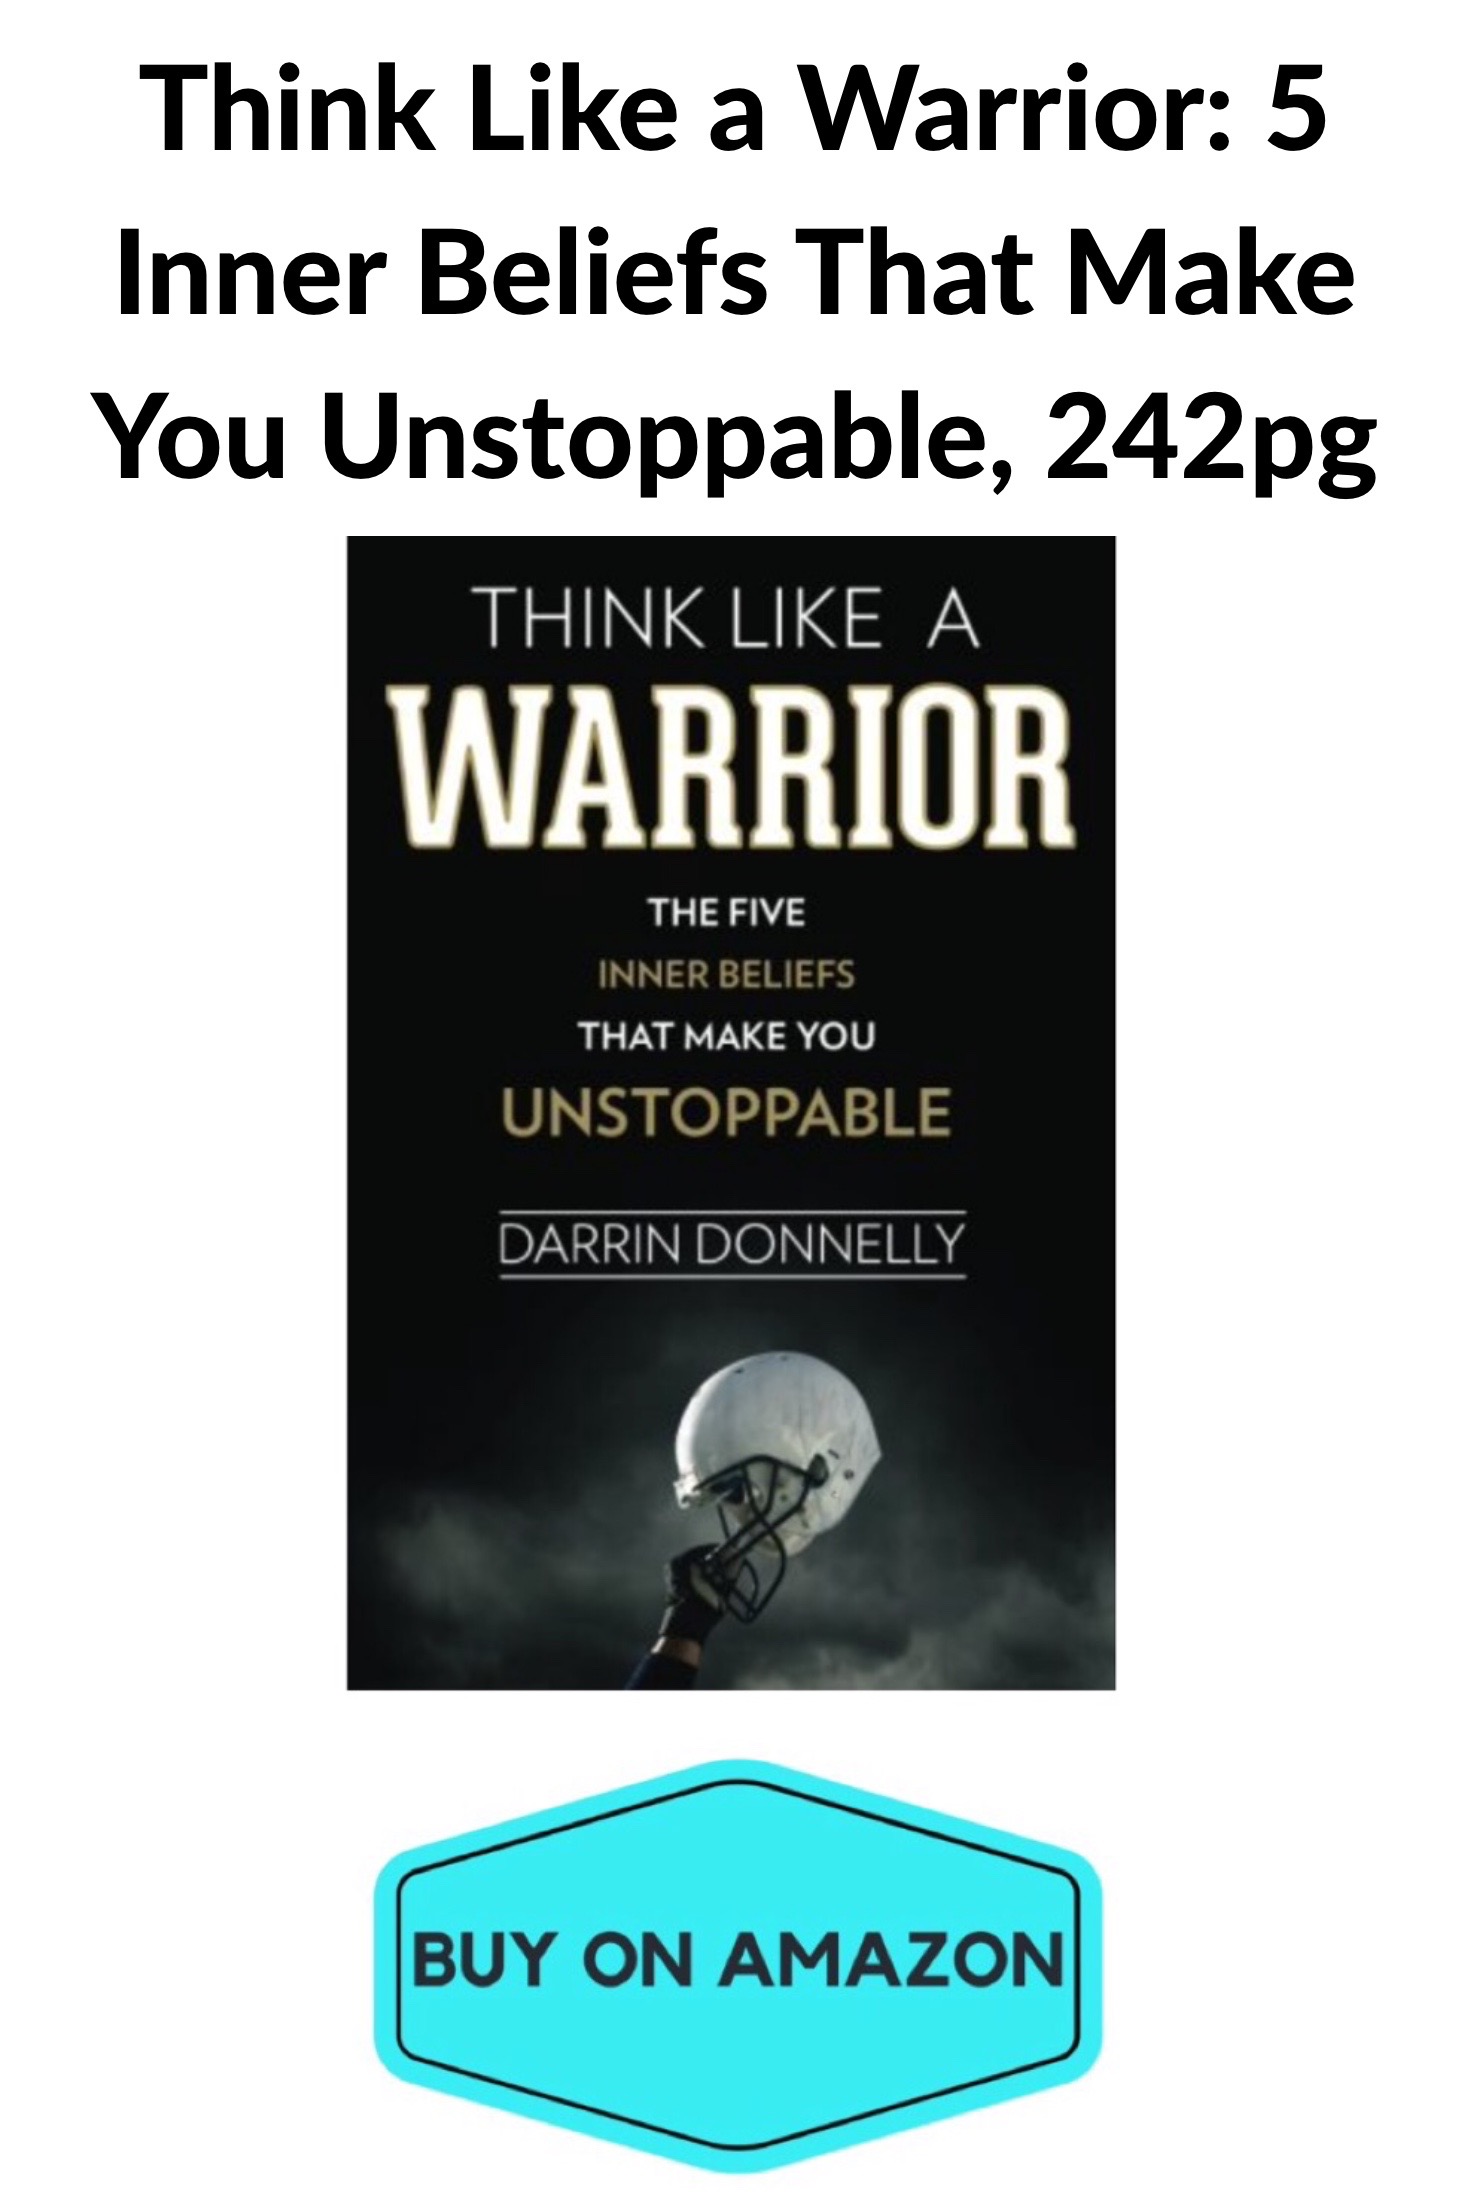 Think Like A Warrior: Five Inner Beliefs That Make You Unstoppable